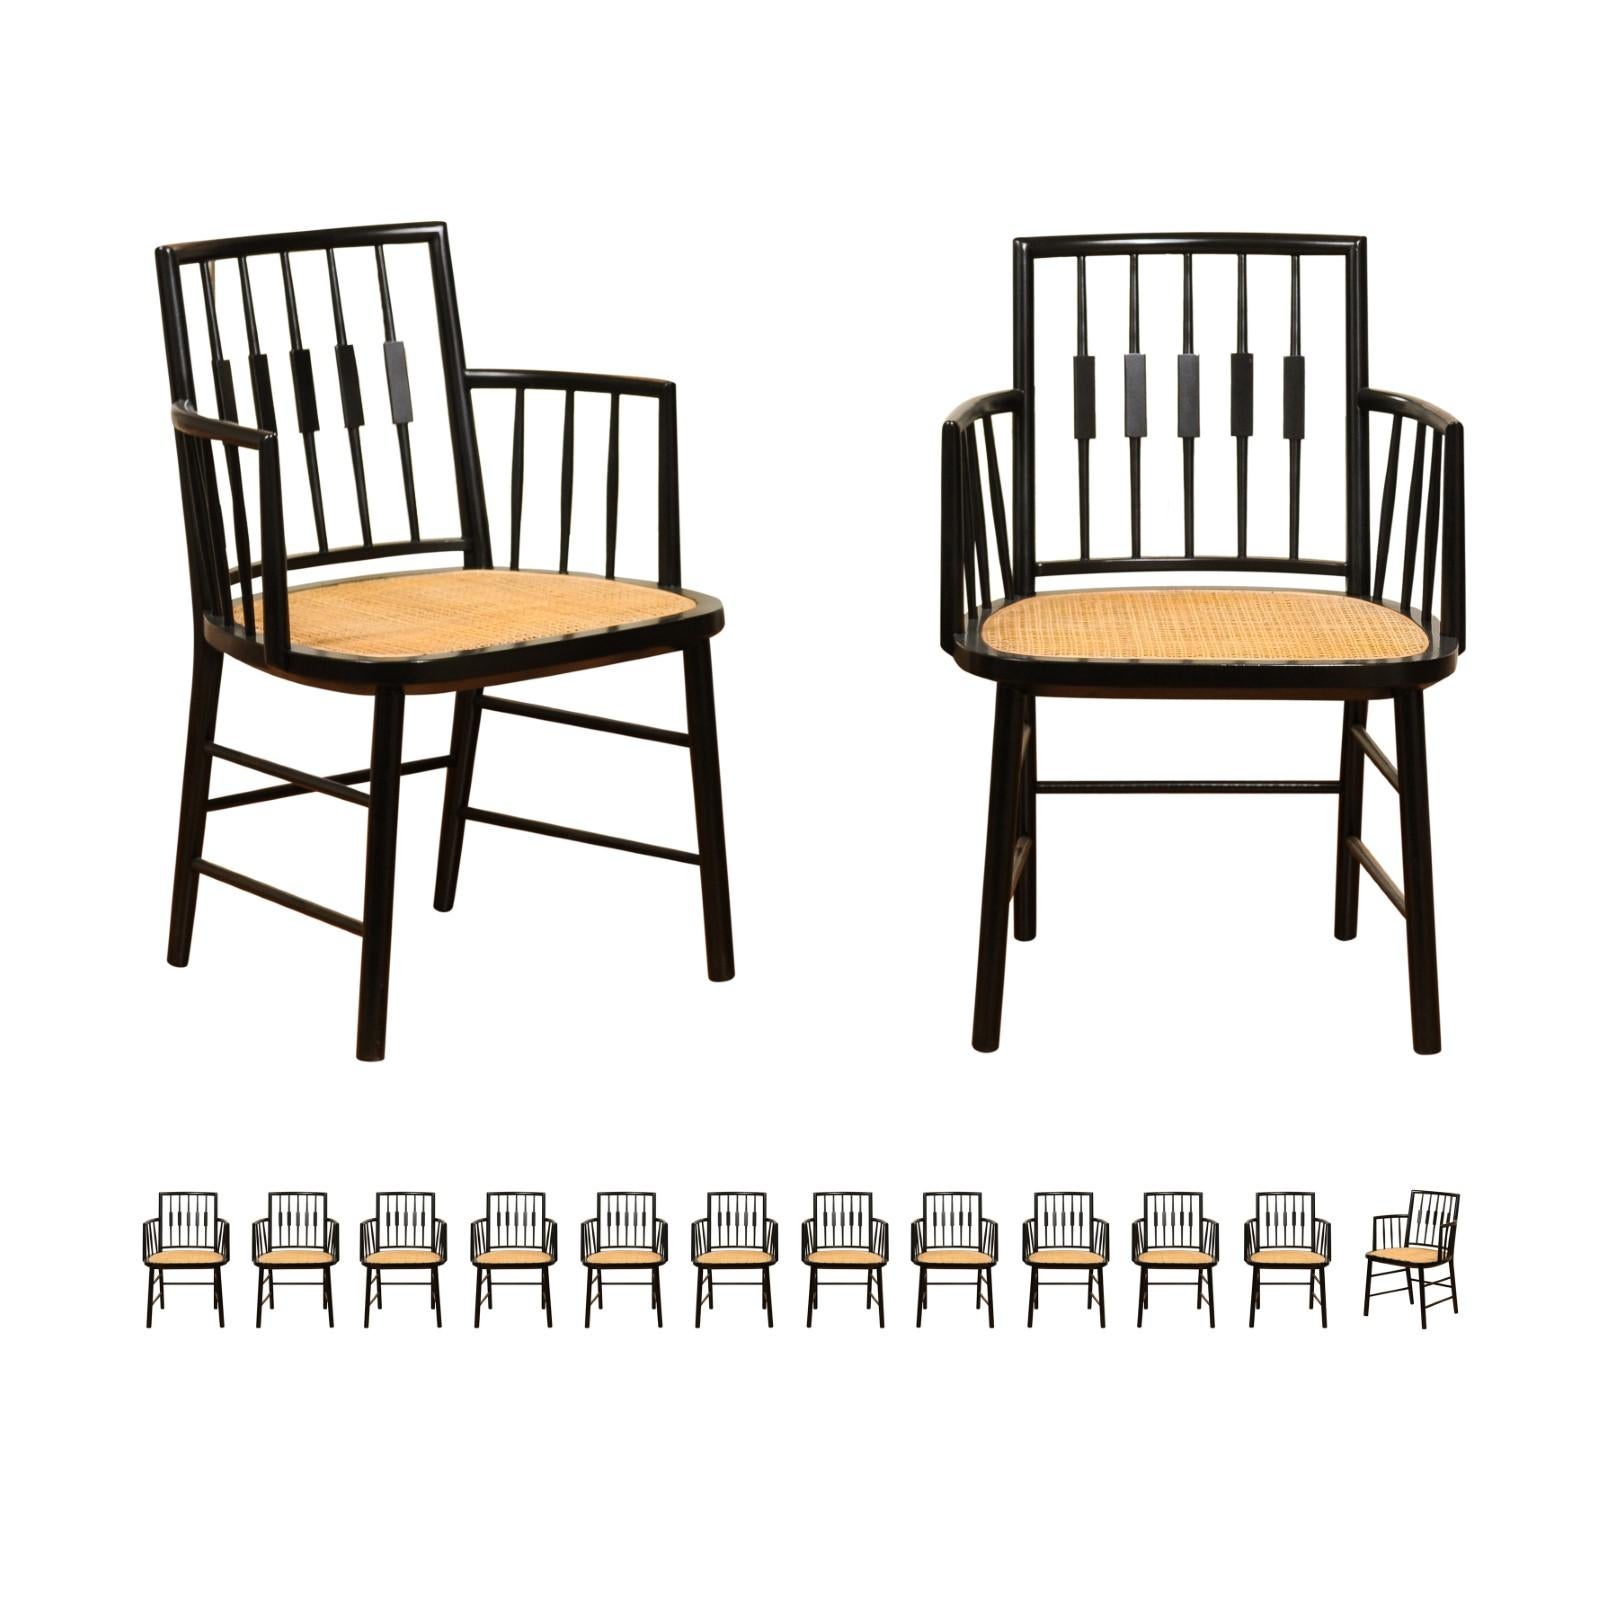 These magnificent dining chairs are shipped as professionally photographed and described in the listing narrative: Meticulously professionally restored and installation ready. There are no sales or auction results pertaining to an All Arms set of